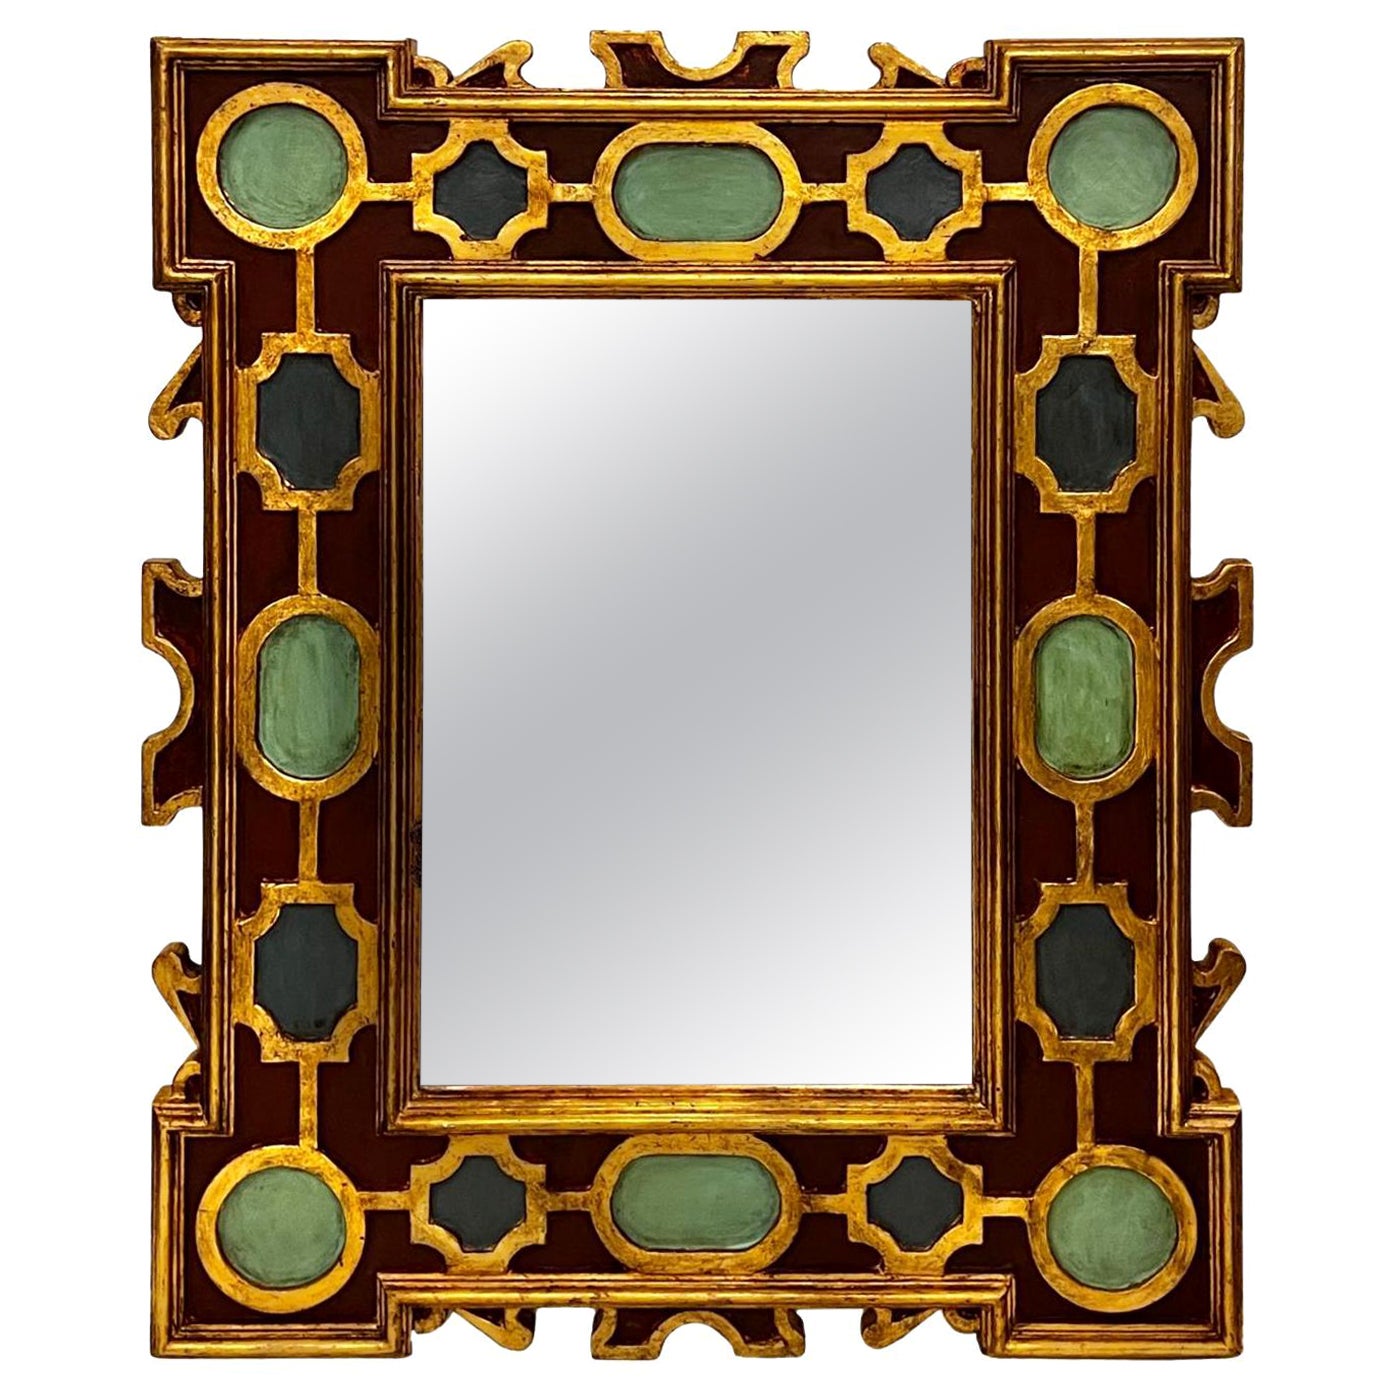 A circa 1920's Italian gilt wood mirror with a painted frame. 

Measurements:
Height: 33